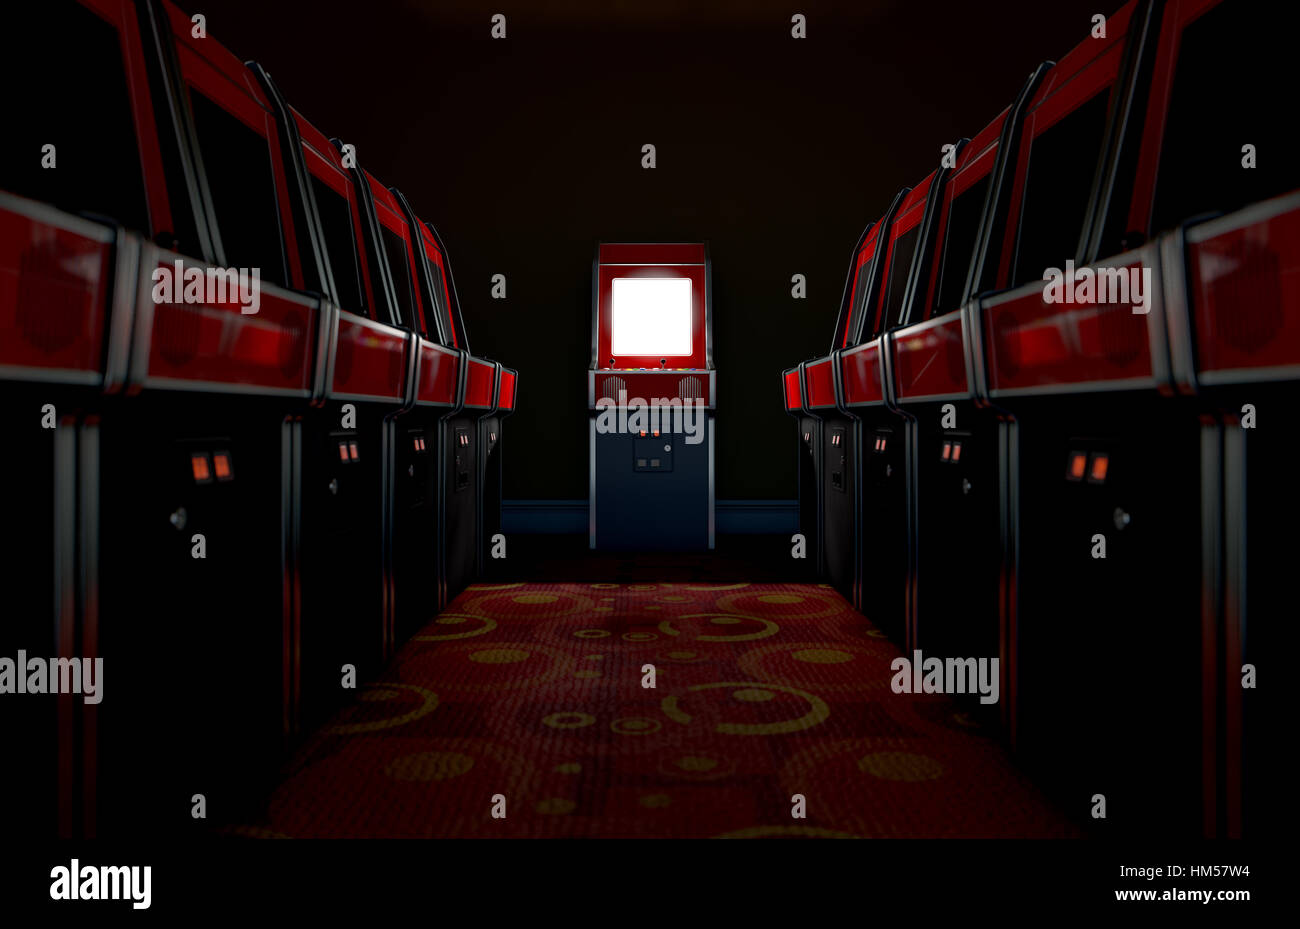 A 3D render of an aisle of switched off vintage arcade game machines with one at the end with an illuminated screen in a retro arcade room Stock Photo